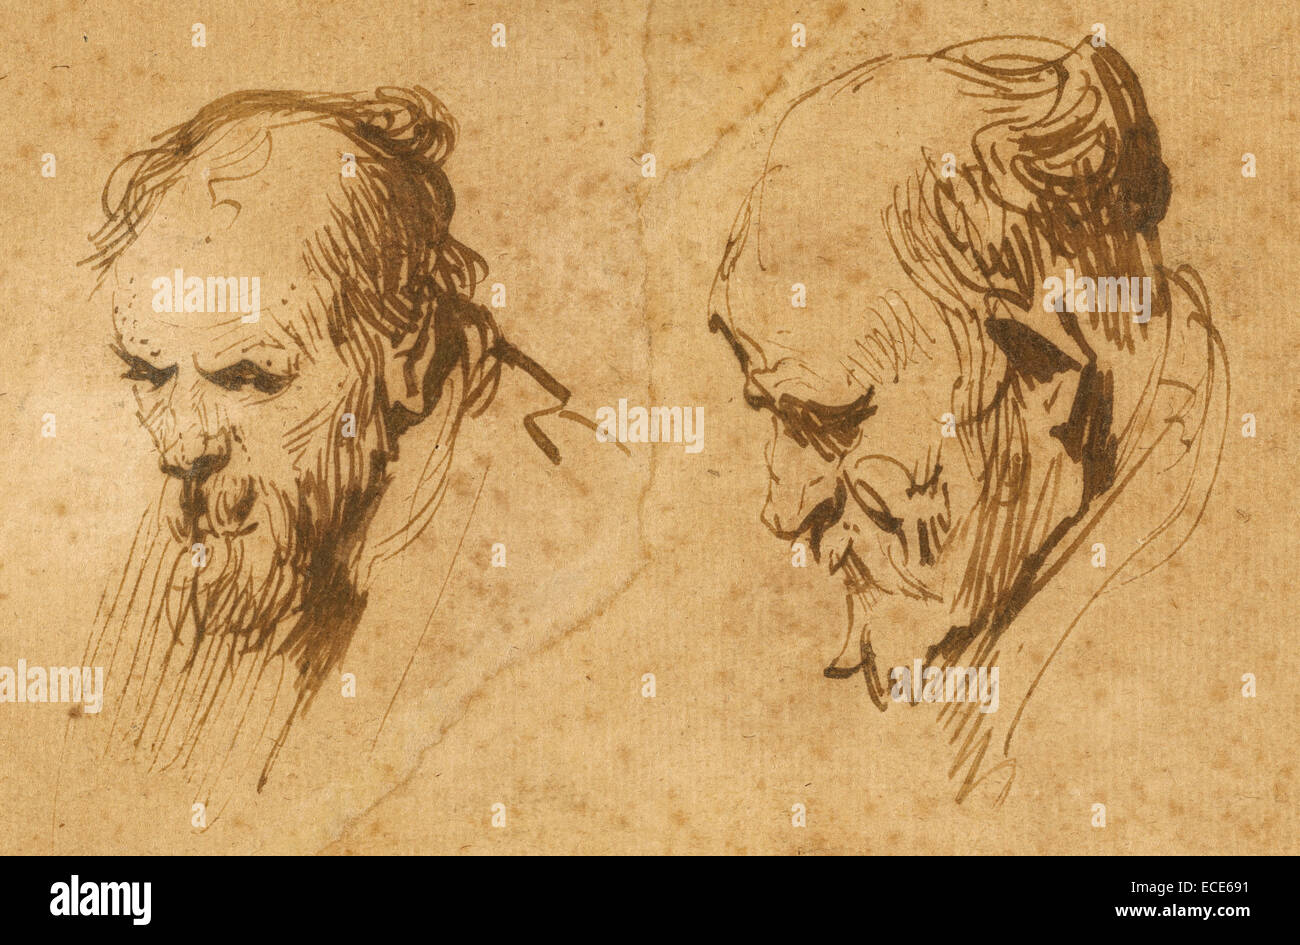 Two Studies of the Head of an Old Man; Rembrandt Harmensz. van Rijn, Dutch, 1606 - 1669; 1626; Pen and brown ink, torn down the center and rejoined; 9 x 14.9 cm (3 9/16 x 5 7/8 in.) Stock Photo